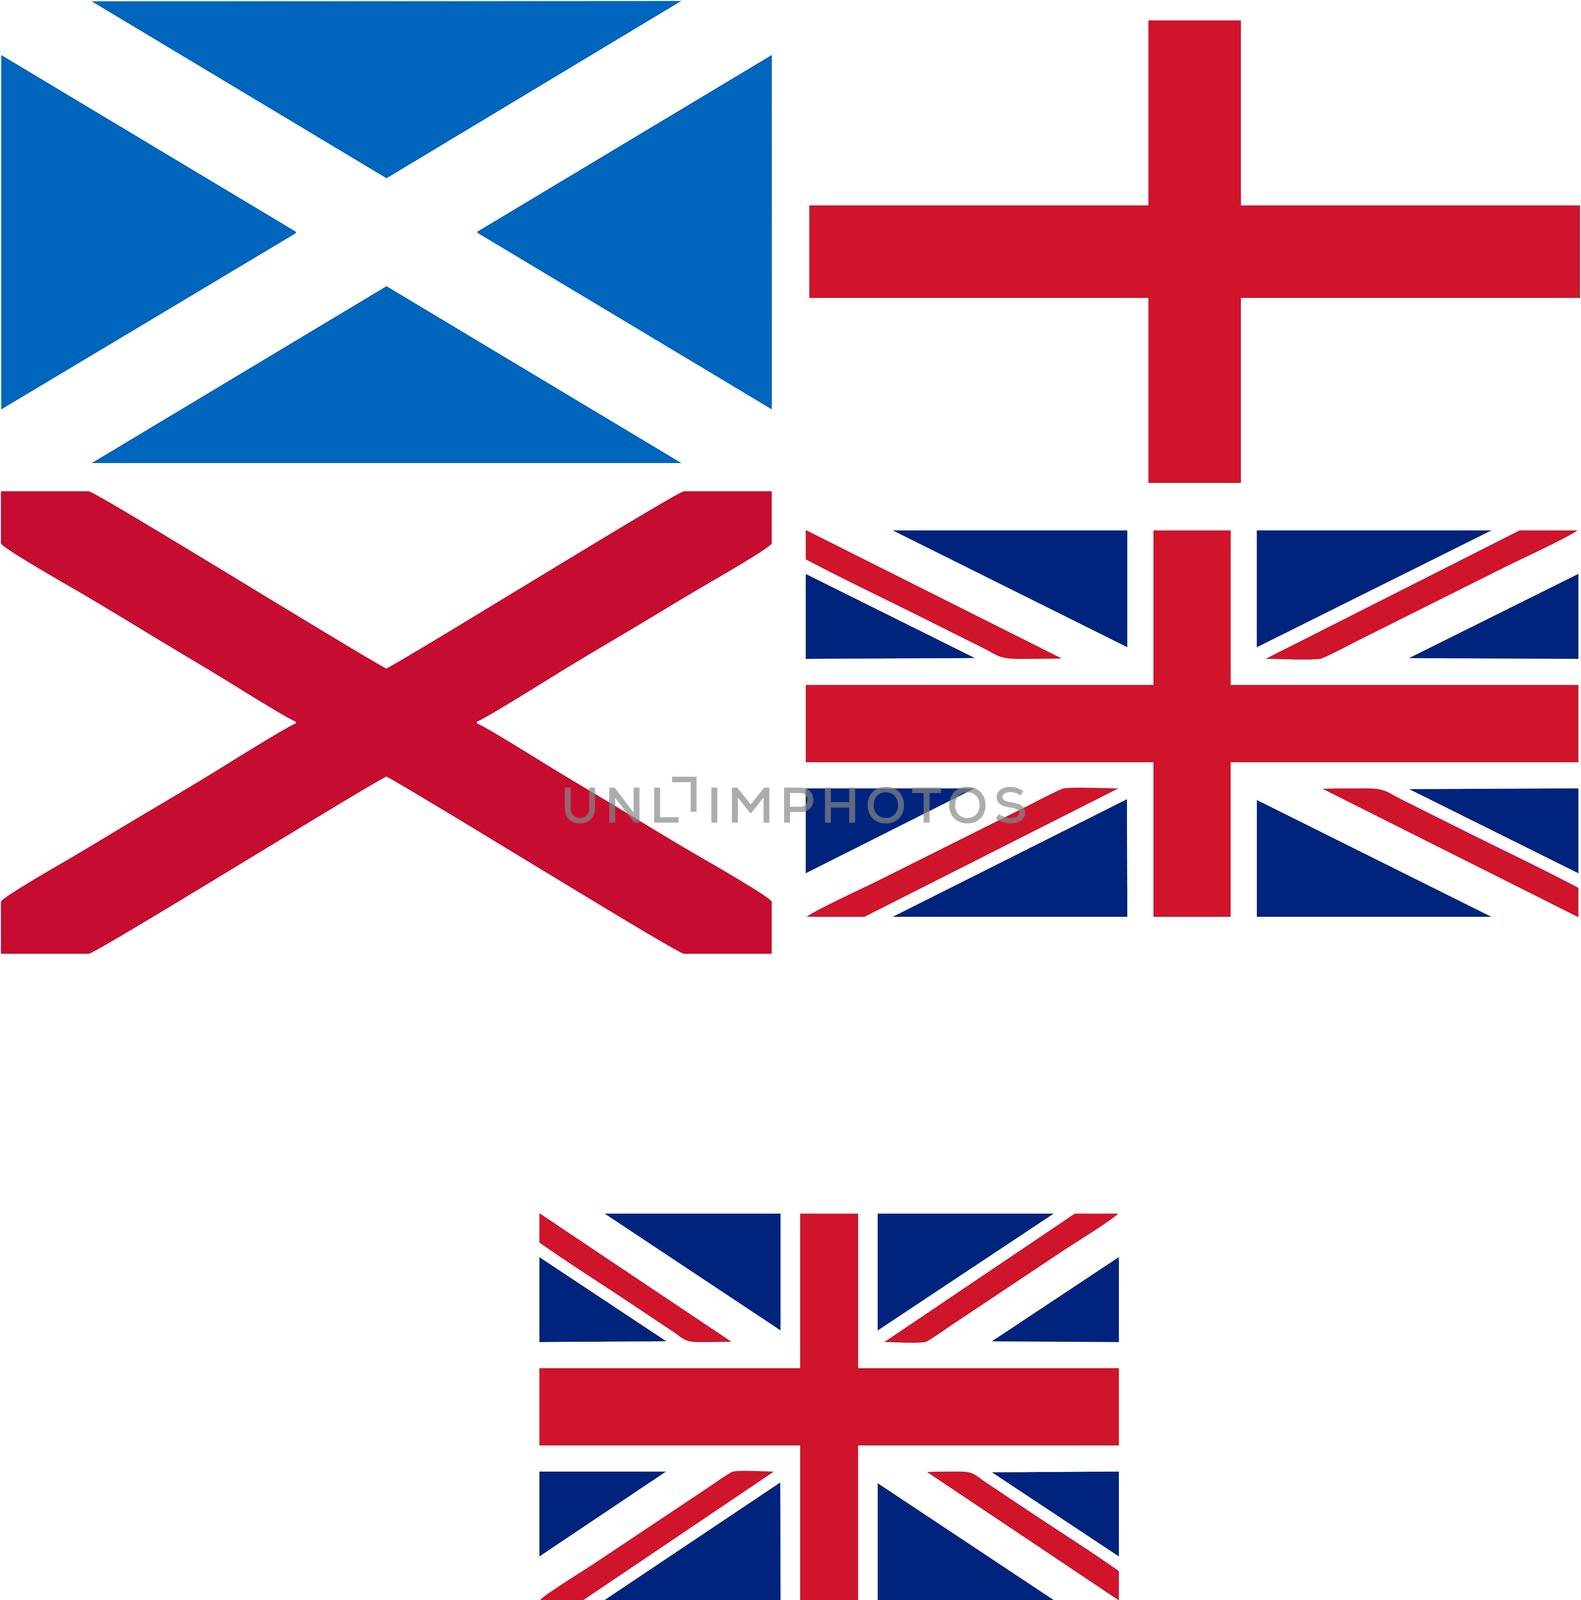 Making of the UK flag, plus stardard 3 x 2 proportion Union Jack useful as language icon on a website - isolated illustration